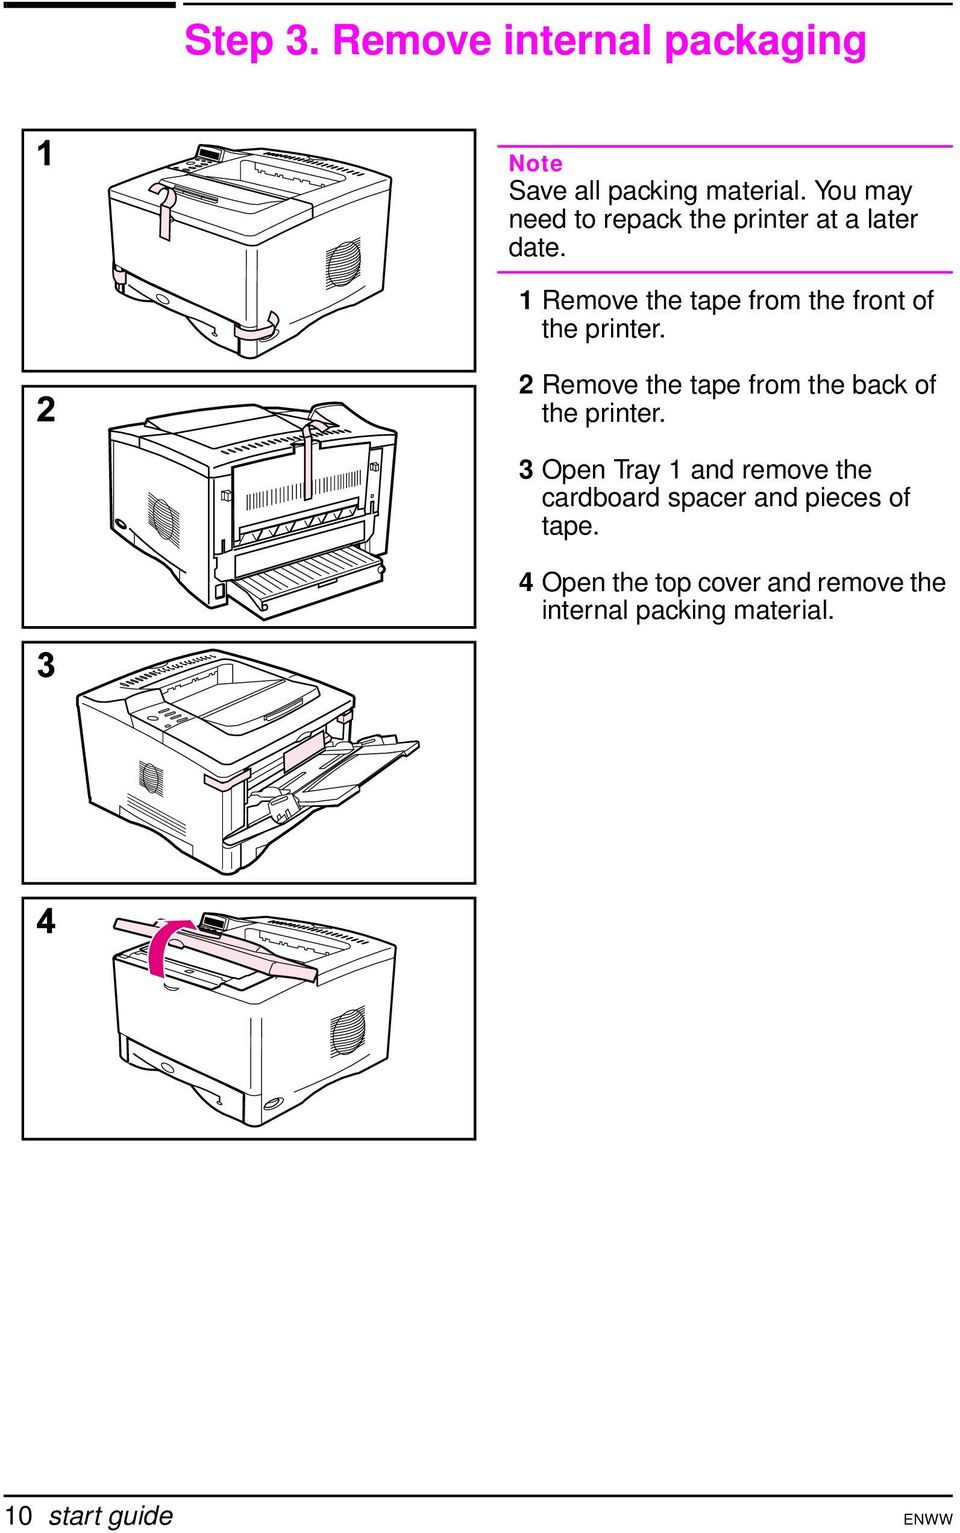 1 Remove the tape from the front of the printer.